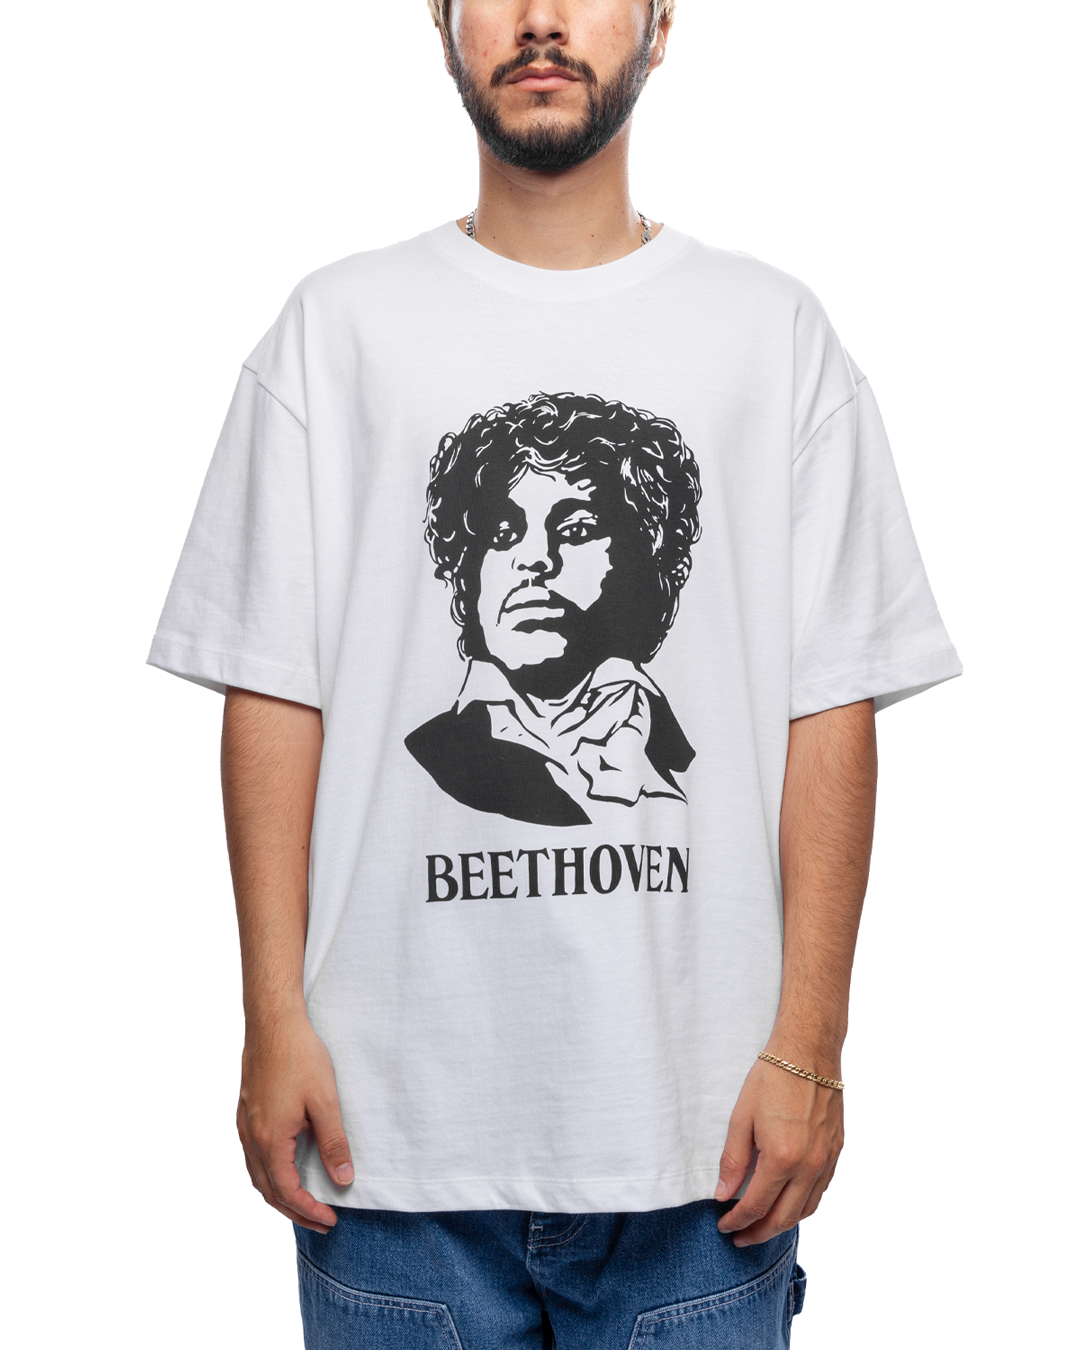 Beethoven SS Tee White